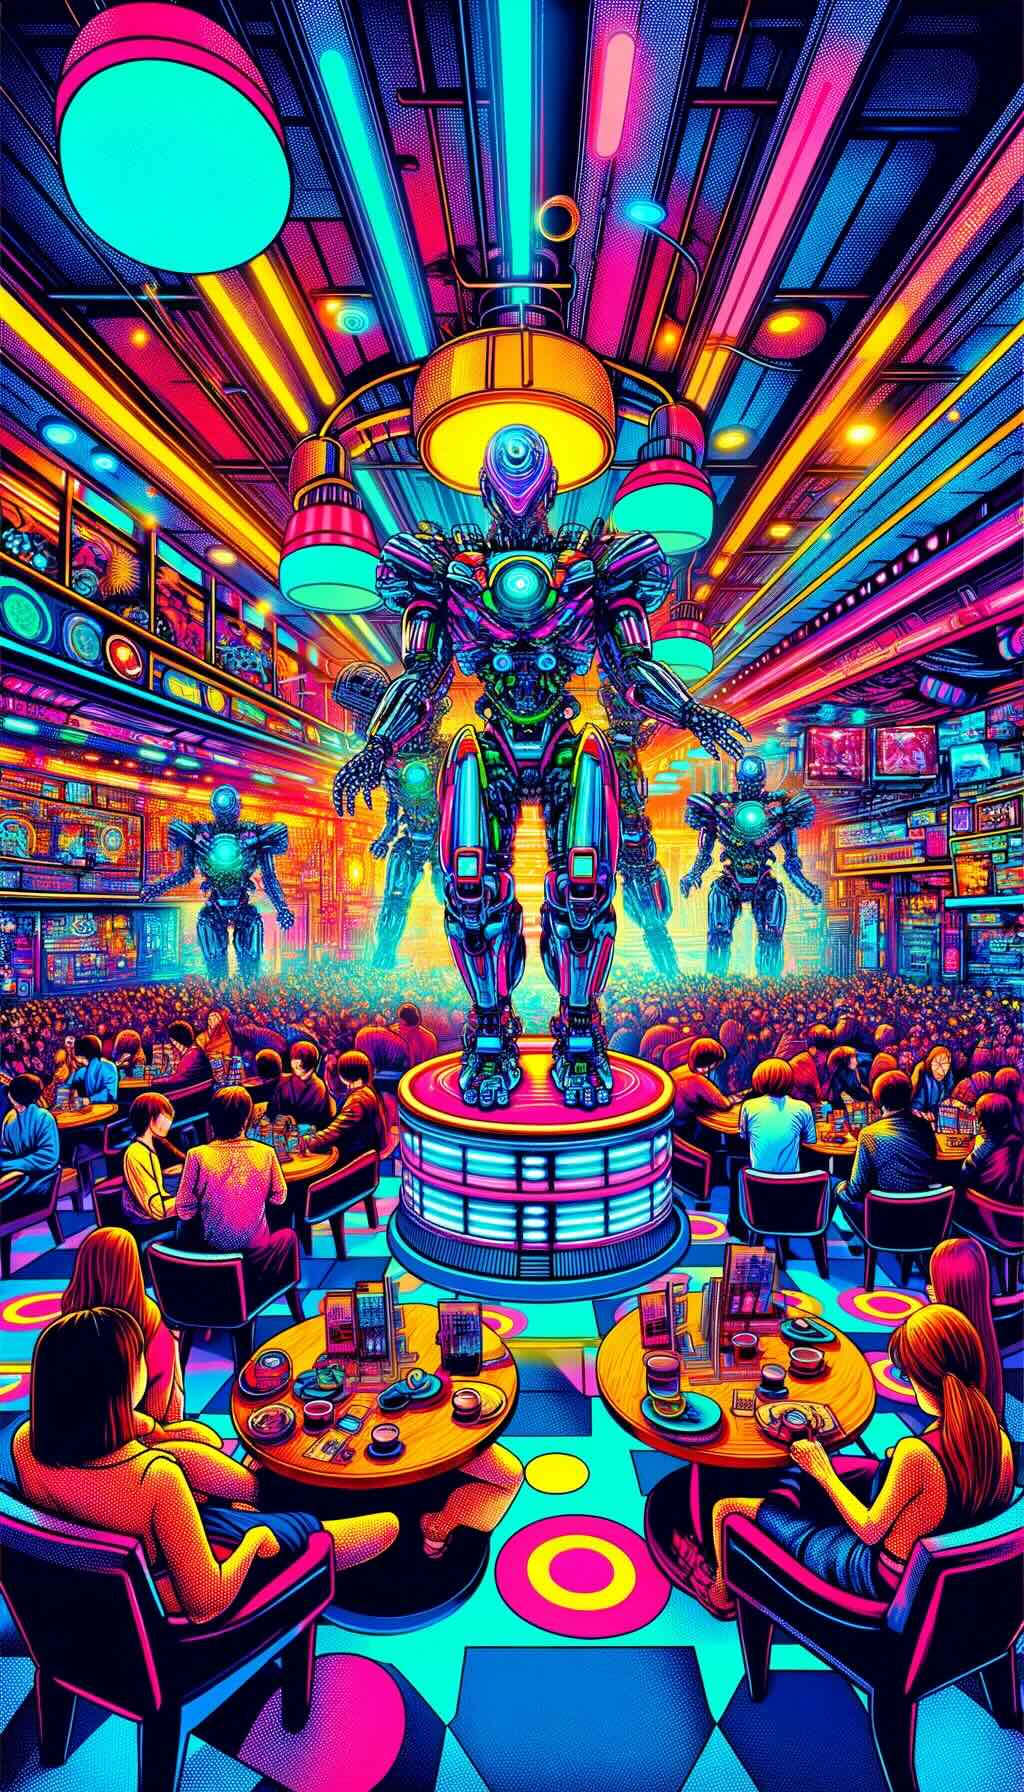 Futuristic and dynamic ambiance of a robot cafe in Tokyo is filled with neon lights, mechanical wonders, and robots engaging in choreographed performances, encapsulating the fusion of technology, art, and entertainment